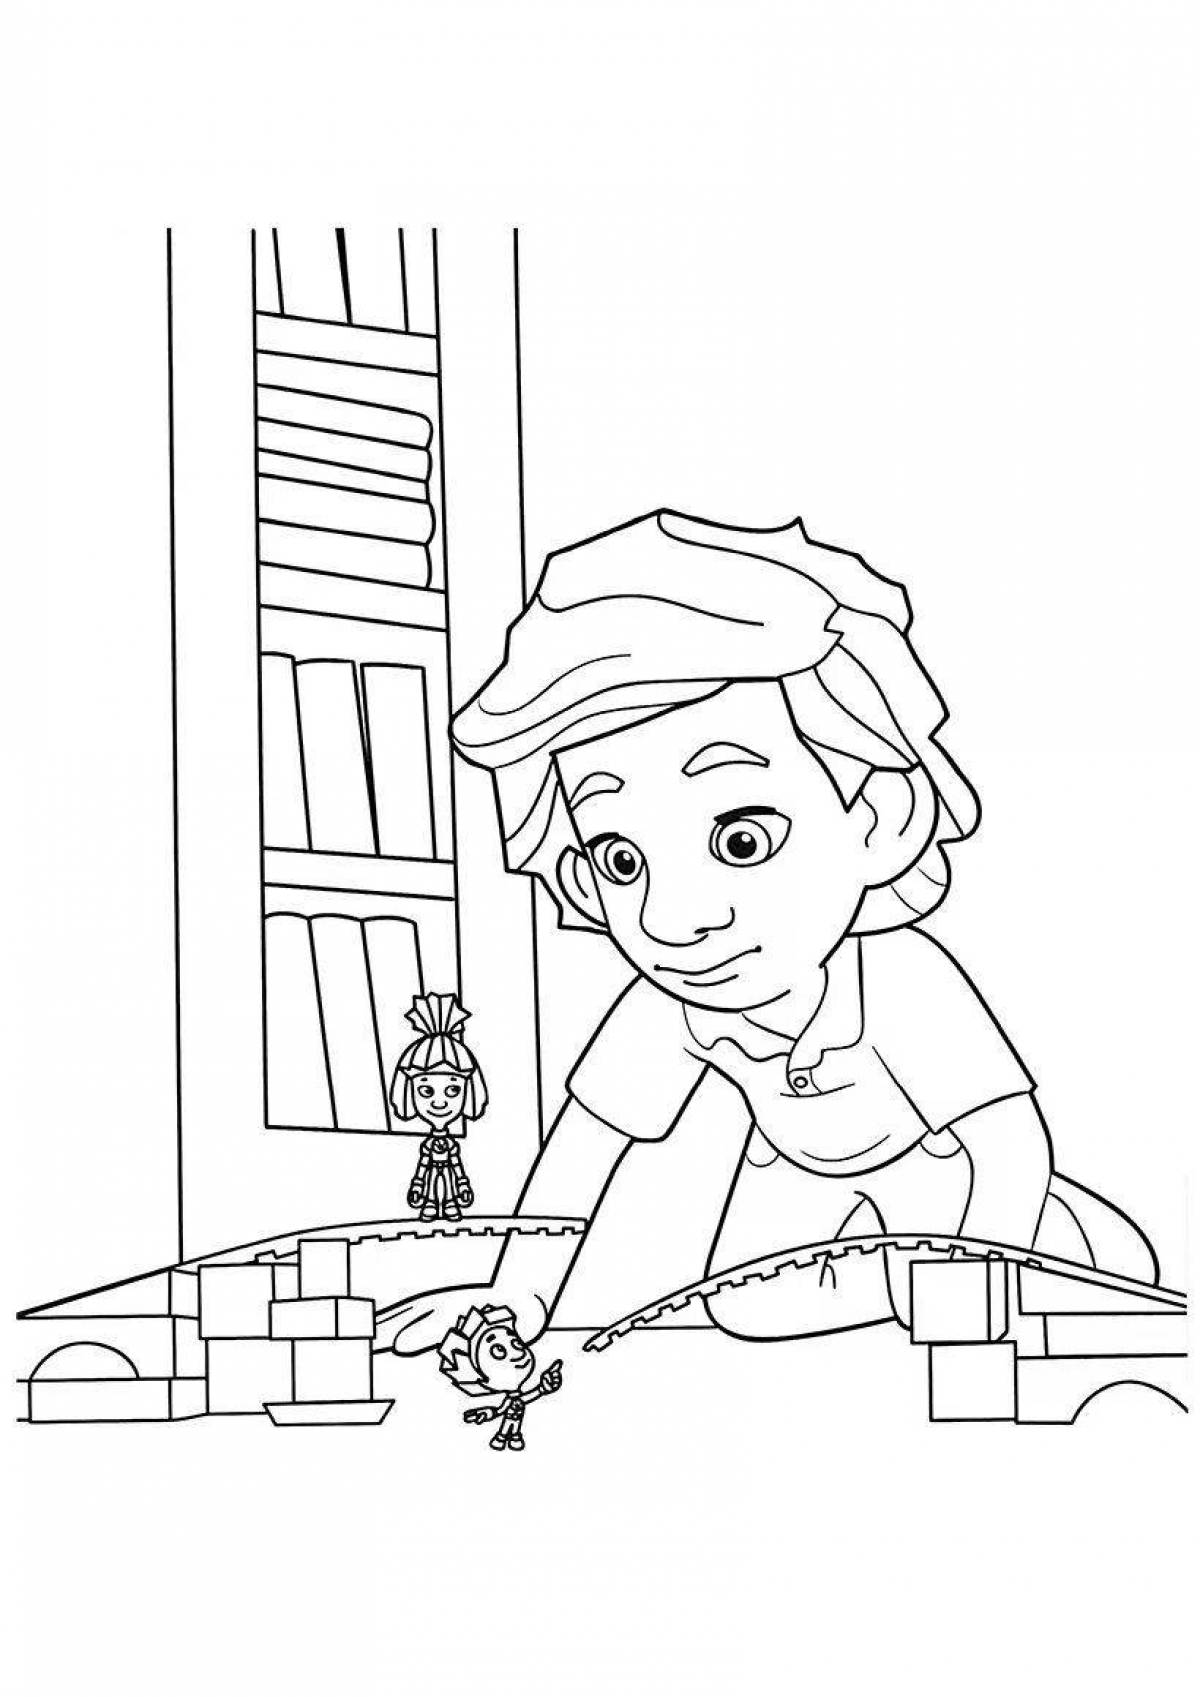 Quirky fixies wire cutter coloring page